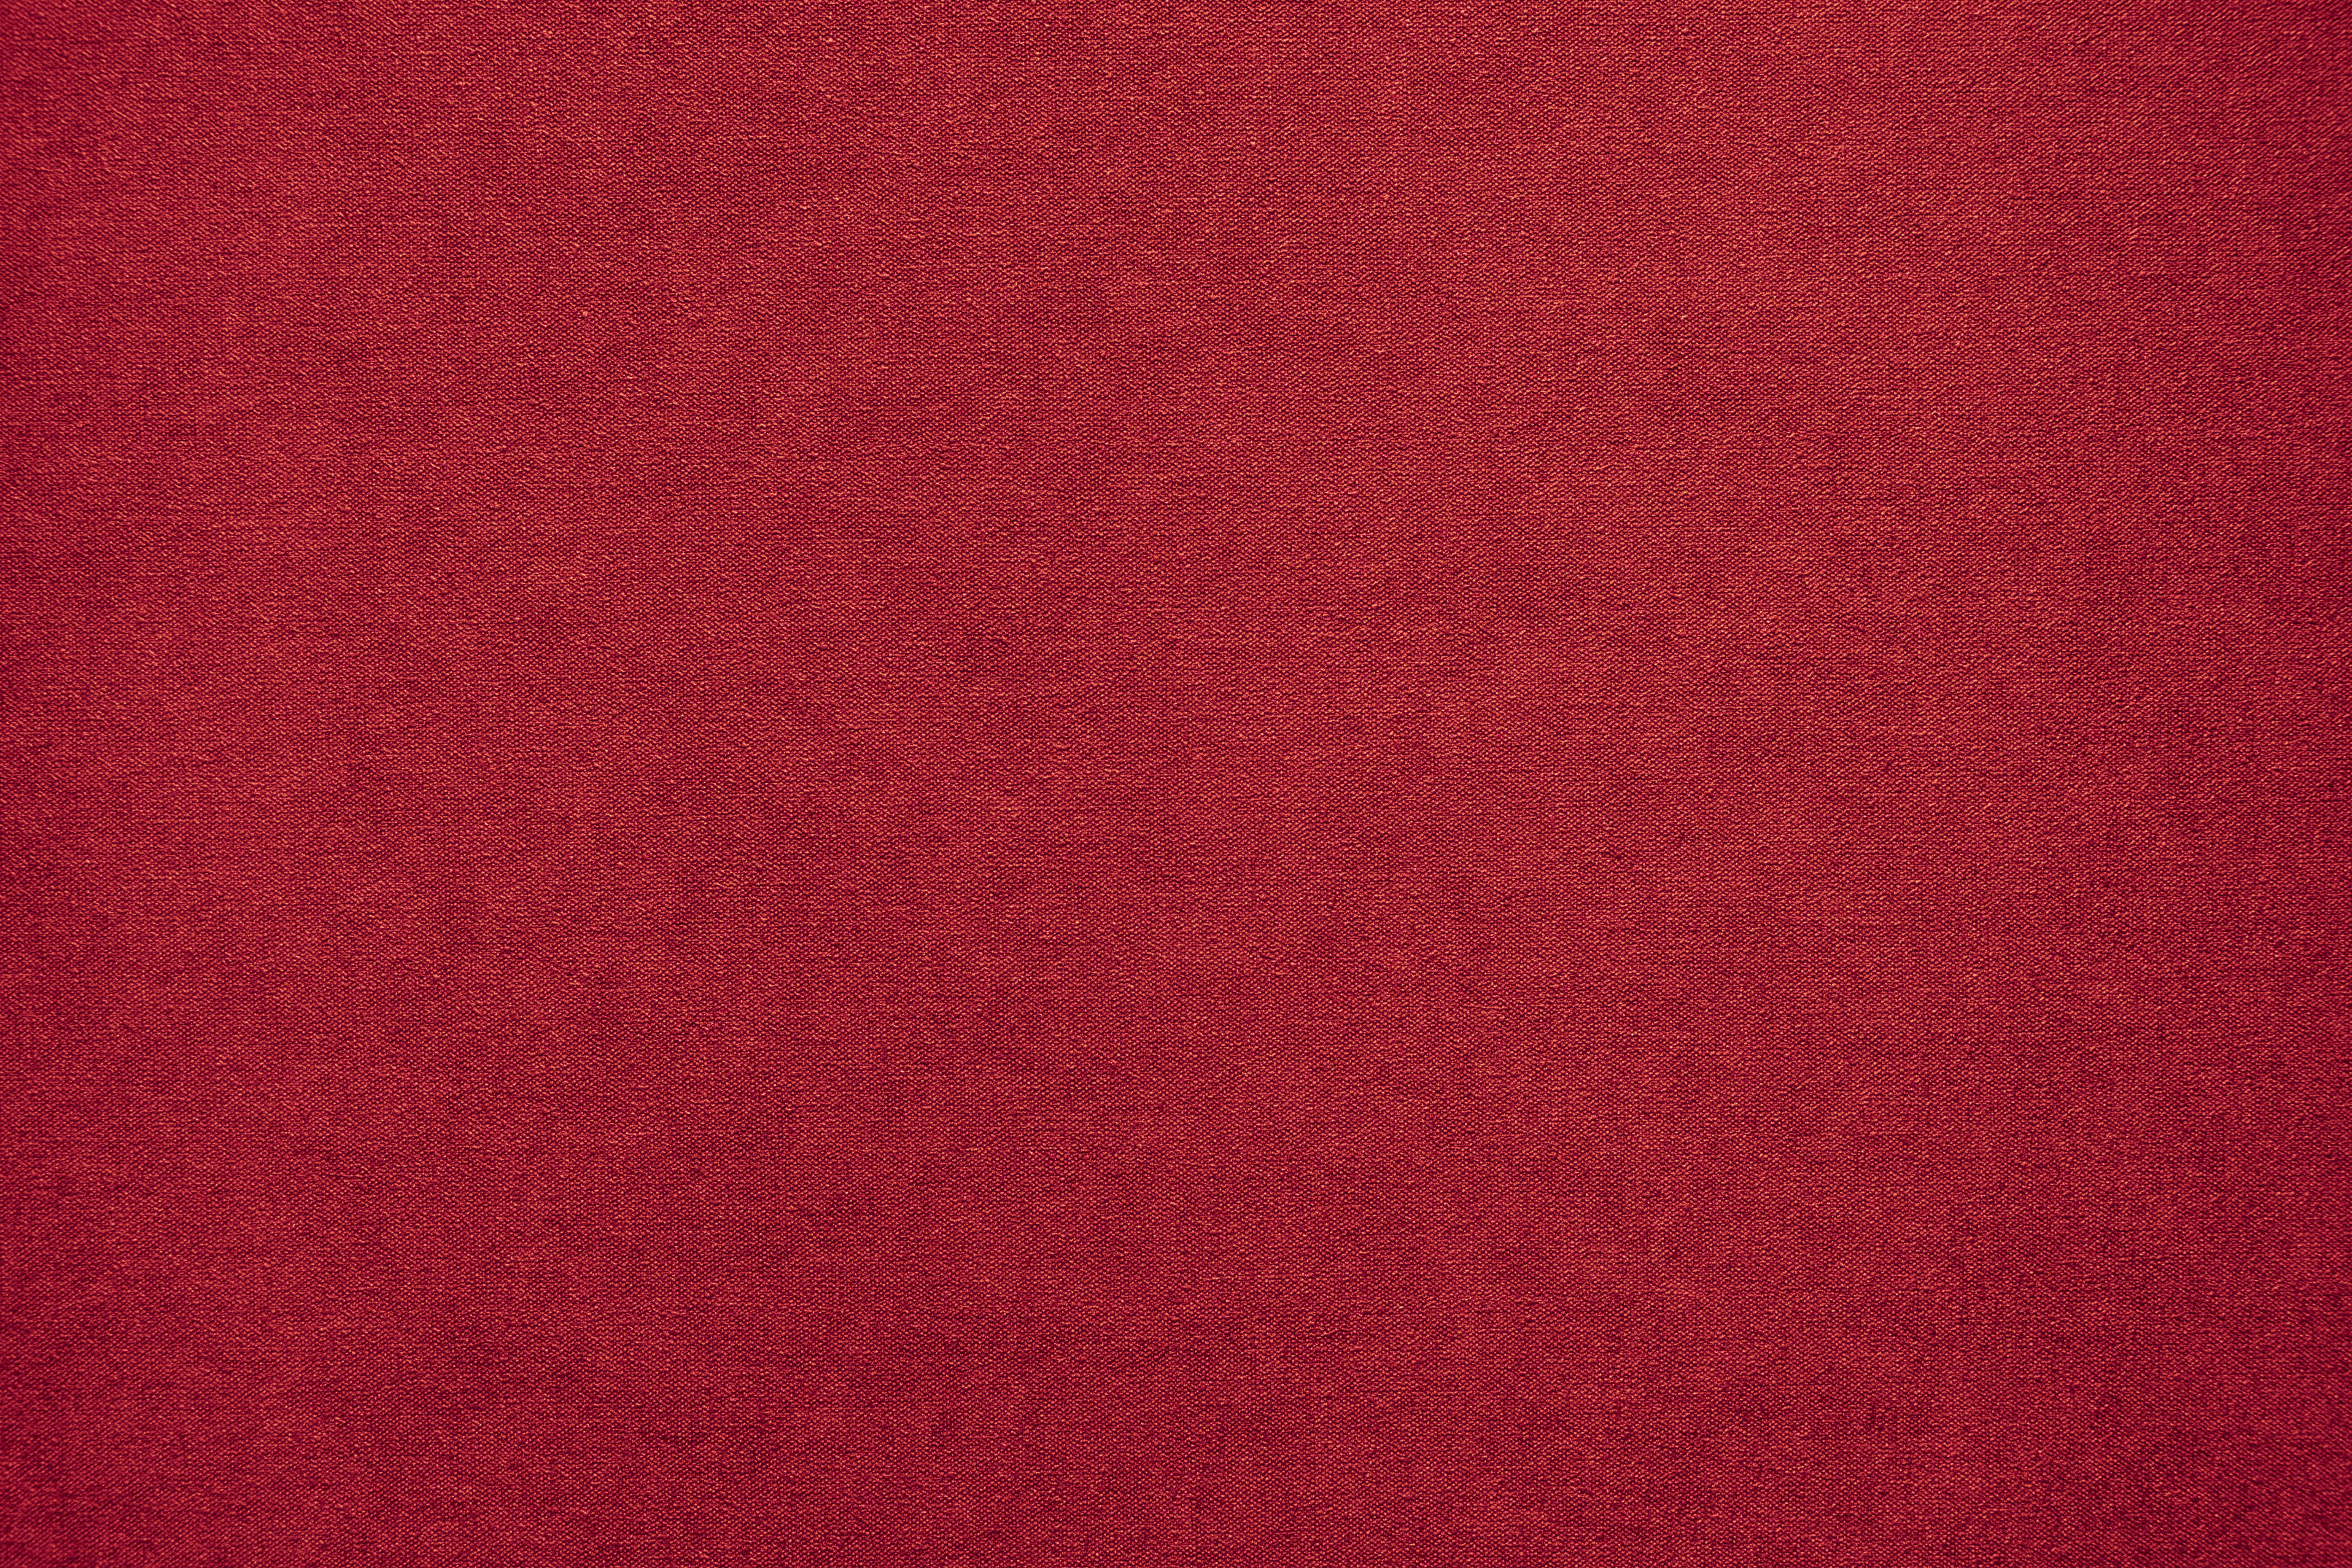 Textured red artistic grainy background